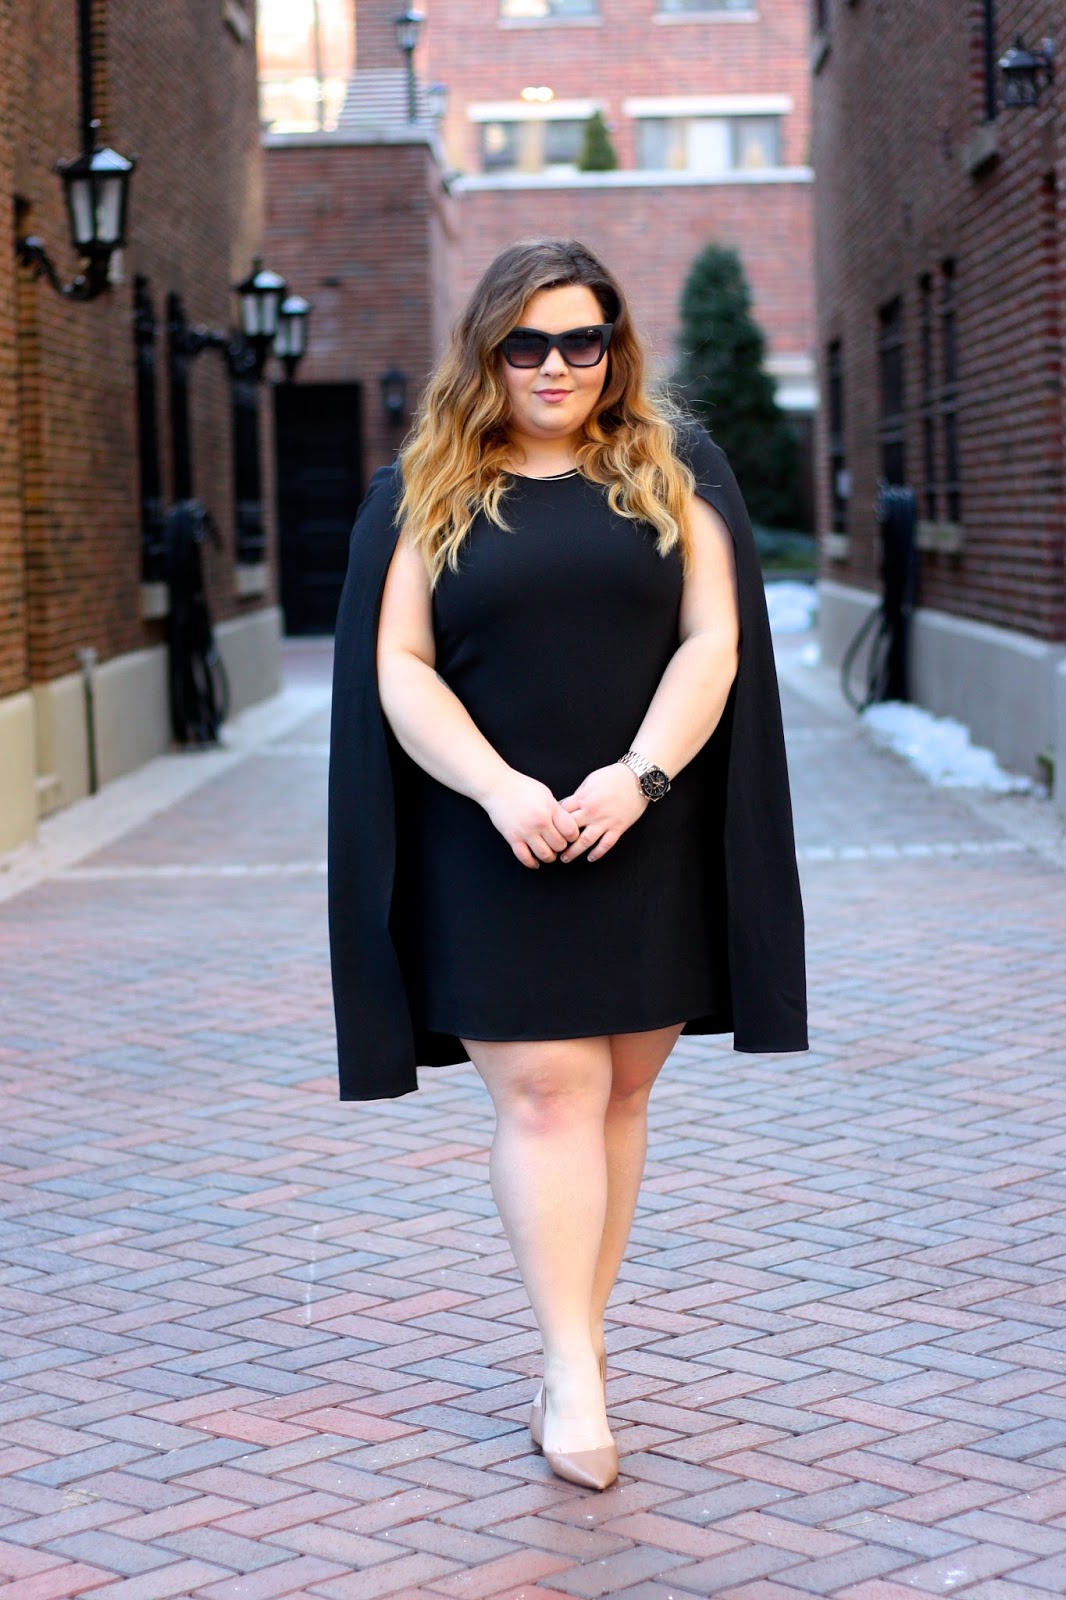 little black dress plus size, LBD, OOTD, natalie craig, cape dress, chicago, natalie in the city, plus size fashion, fashion blogger, forever 21 plus, capes, 2016 fashion trends, why men dont like certain trends, curves and confidence, quay sunglasses blogger, bold sunglasses for my face shape